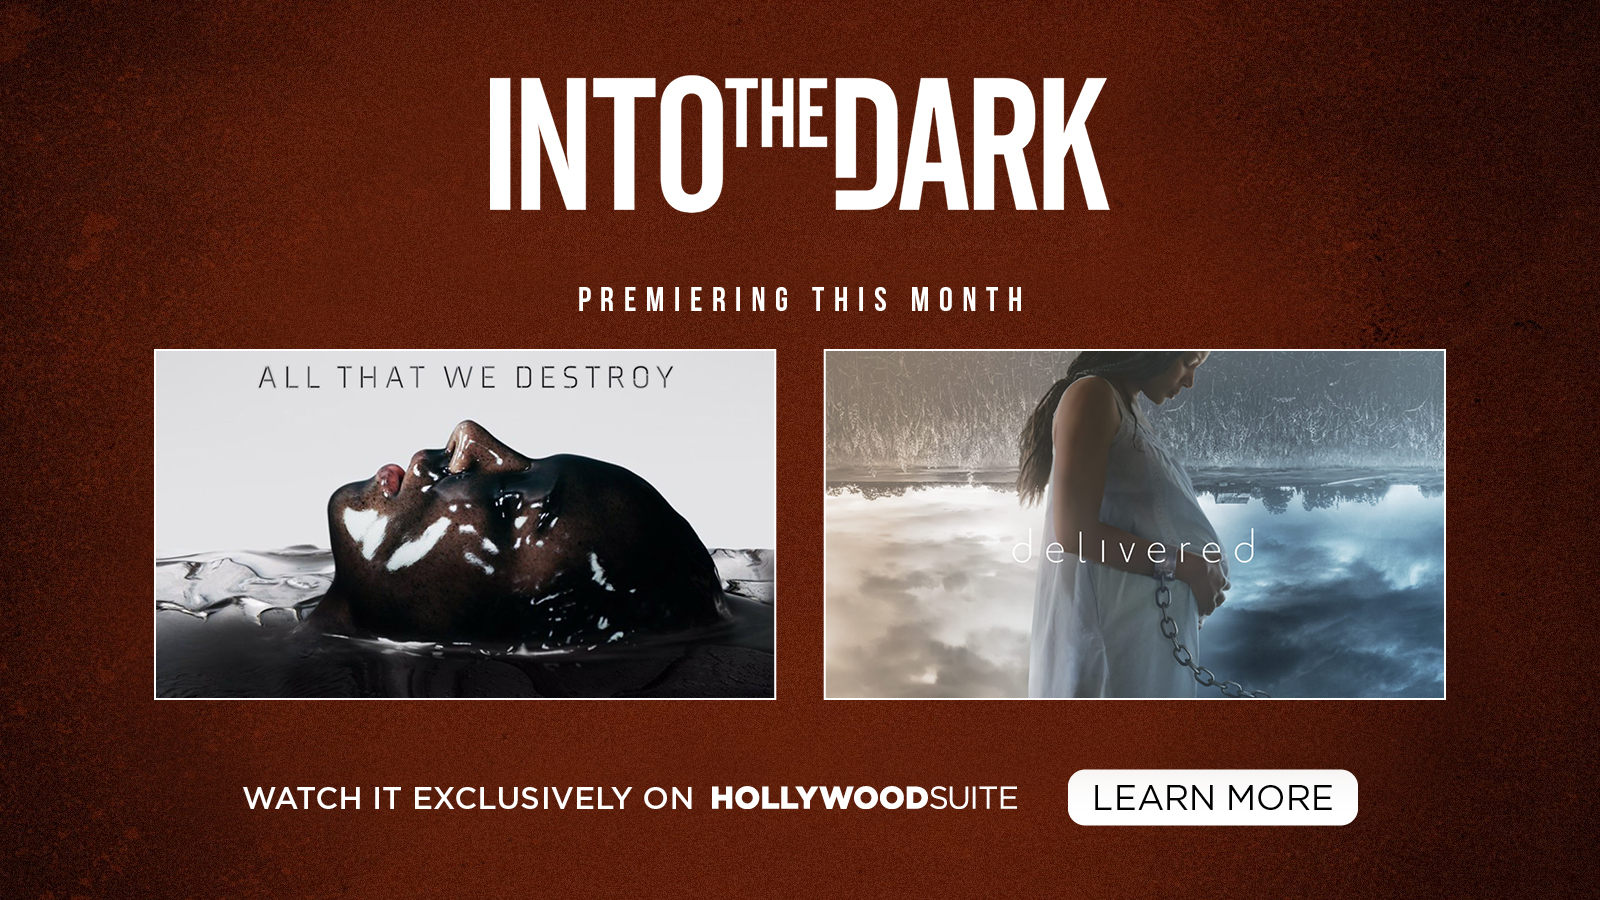 Into the Dark premiering this month All That We Destroy, Delivered LEARN MORE